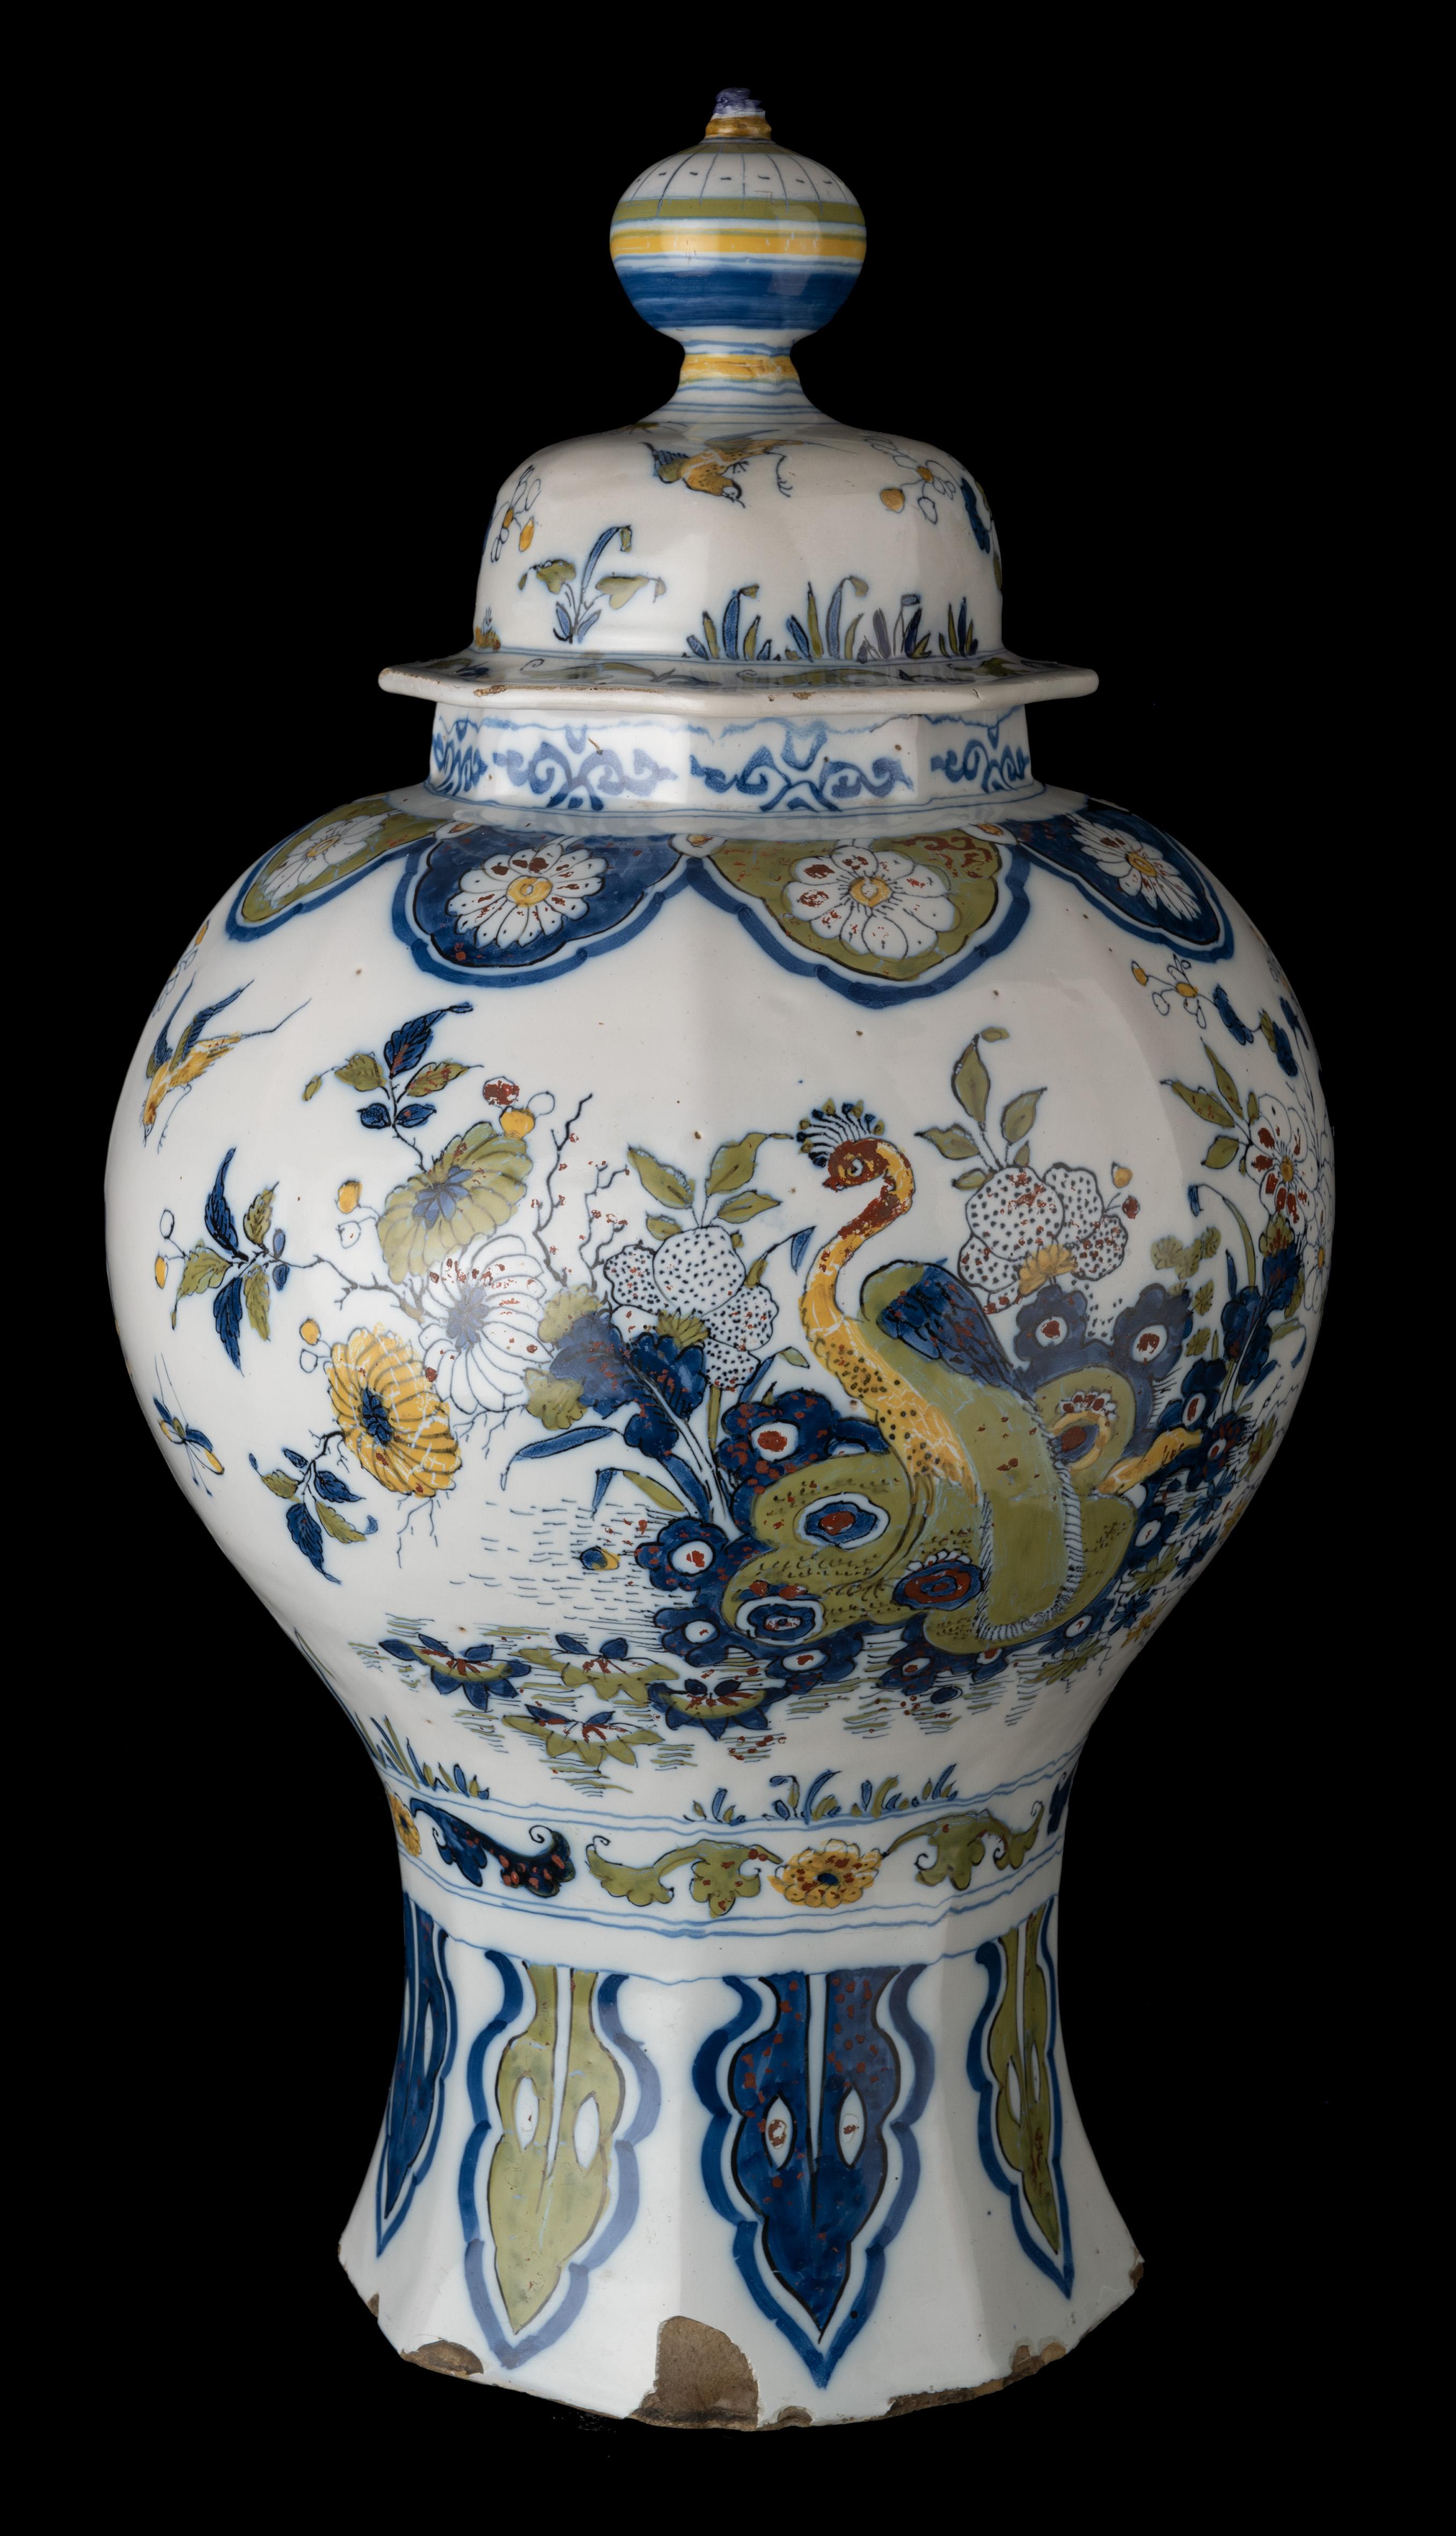 Polychrome covered jar with peacock and dragon in a landscape. Delft, 1690-1700 
The Peacock pottery [attributed to] 

The octagonal baluster jar with lid is painted in polychrome with a peacock and a mythical dragon in a water landscape. On the